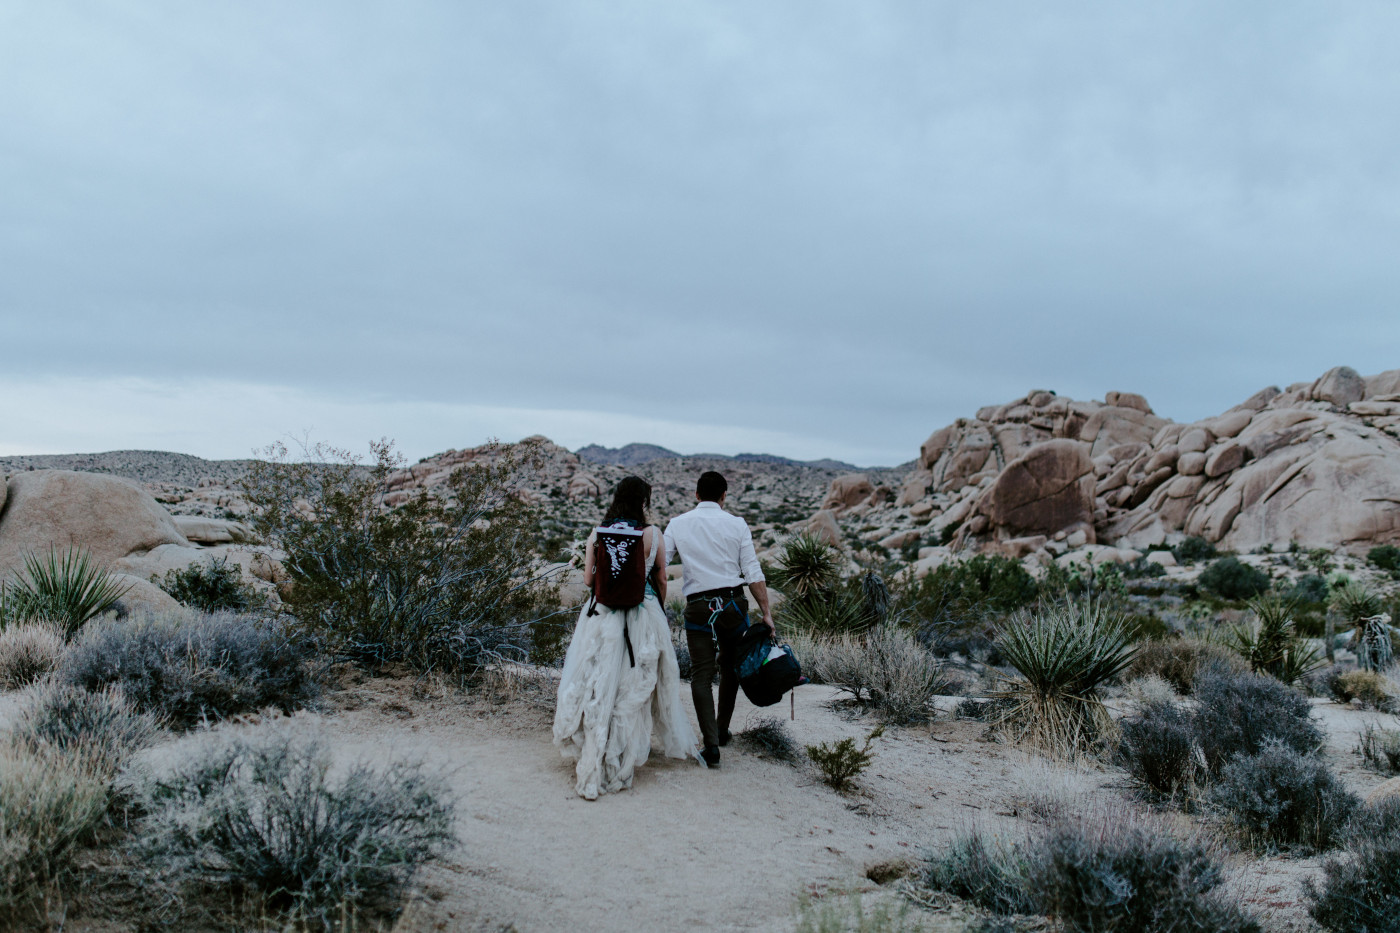 Shelby and Zack walk through Joshua Tree together.